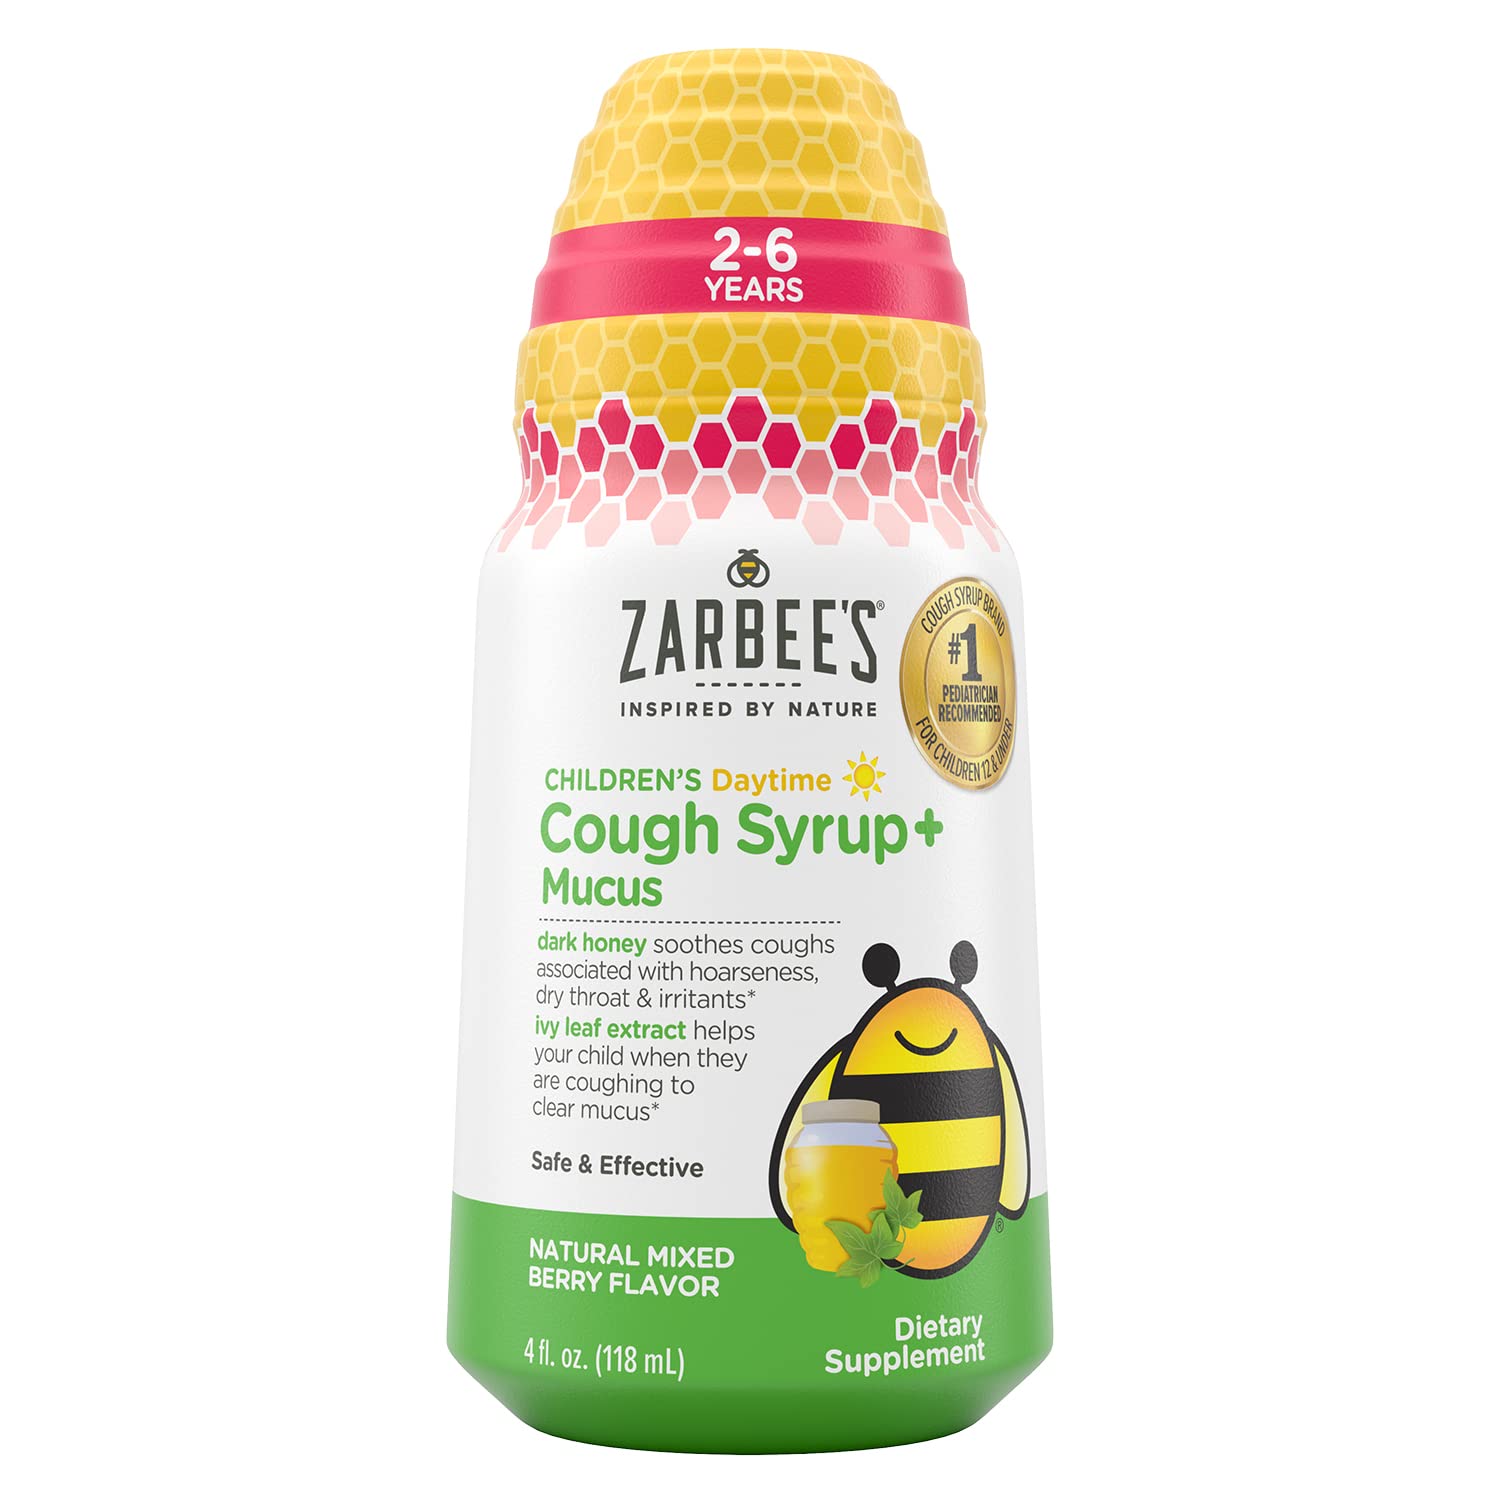 Zarbee's Kids Cough + Mucus Daytime for Children 2-6 with Dark Honey, Ivy Leaf, Zinc & Elderberry, 1 Pediatrician Recommended, Drug & Alcohol-Free, Mixed Berry Flavor, 4FL Oz